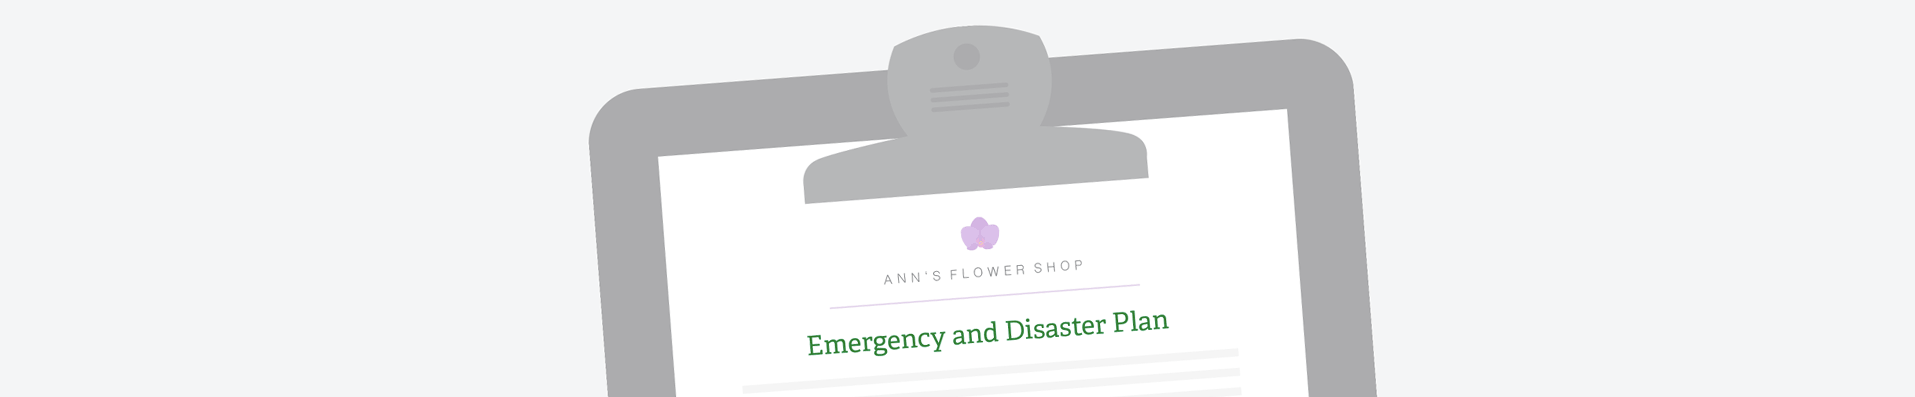 Establishing emergency recovery and disaster plan